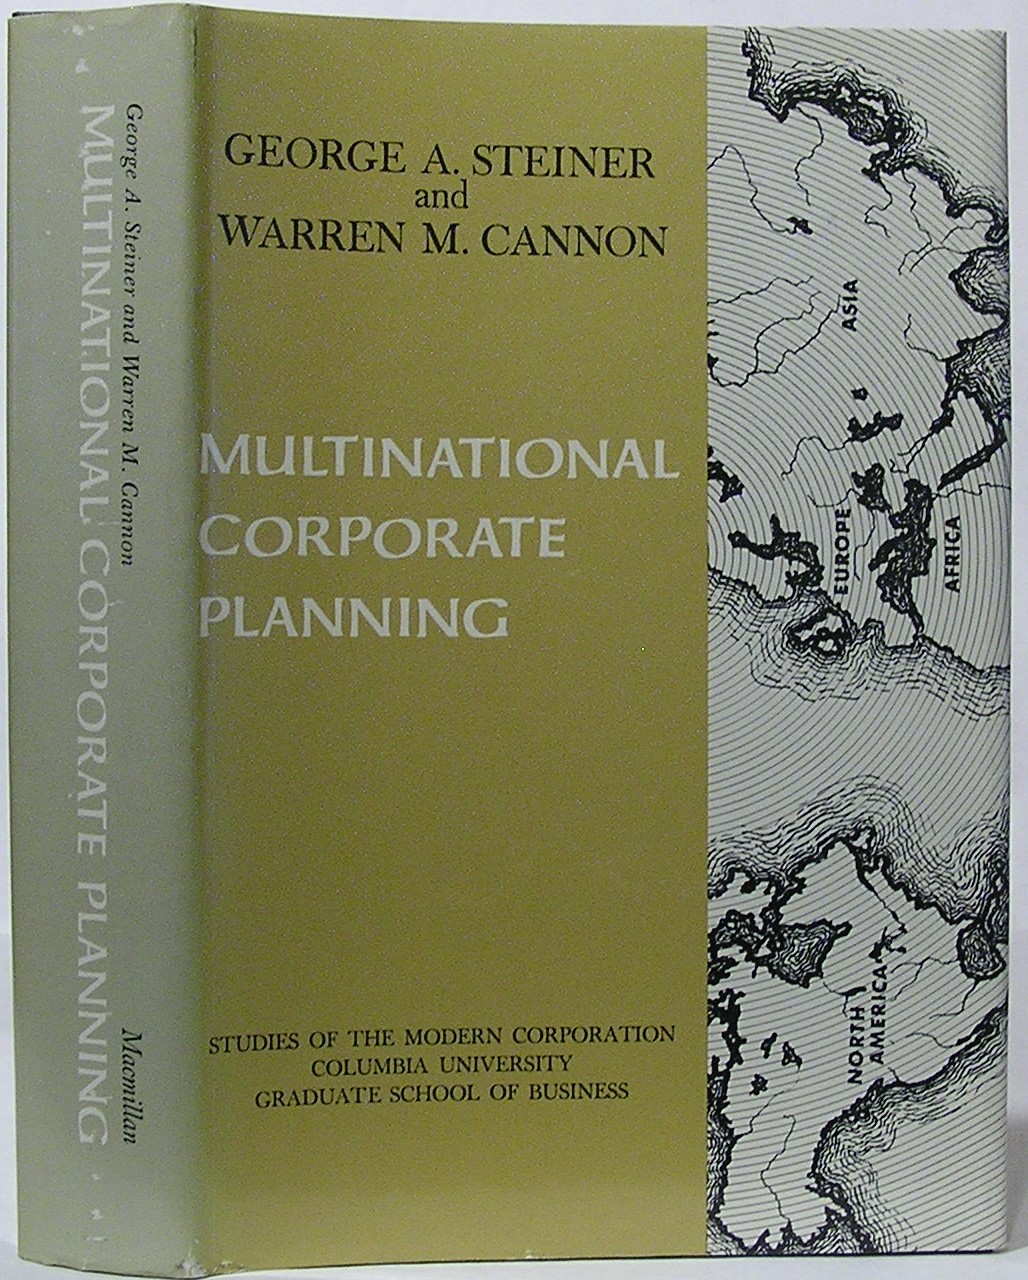 Multinational Corporate Planning Steiner, George A.(Editor); Cannon, Warren M.(Editor) [Very Good] [Hardcover] Near Fine ; Very Good Jacket. 1966 The Macmillan Company. An Arkville Press Book. Series: Studies of the Modern Corporation, Columbia University Graduate School of Business. SIGNED by Richard Eells, the series editor, on series page; name only, in blue ink. NOT ex-library. Hardcover has navy cloth-covered boards with copper spine and cover lettering. Top page edges are yellow. Publisher's logo on front cover. 330 pages. Binding tight. Hinges NOT cracked. Spine ends and bottom front corner very lightly bumped. Pages clean and unmarked. Dust jacket has very light edge and surface wear, with light wrinkling and some scuffing at the corners and spine ends. Dust jacket spine sunned, but lettering still clear. Carefully packed, shipped in a box.